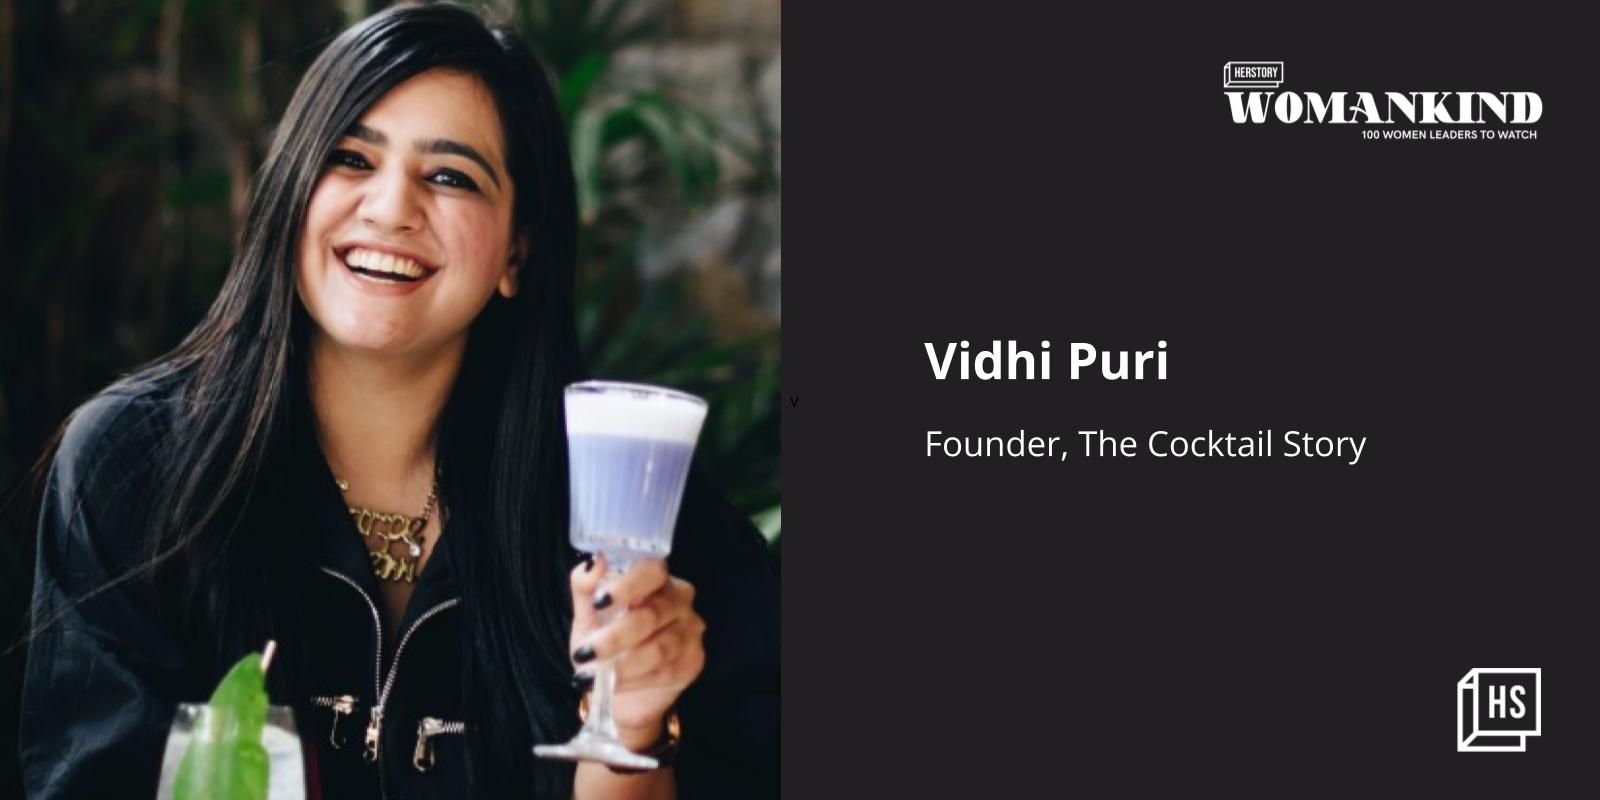 [100 Emerging Women Leaders] Meet Vidhi Puri, the entrepreneur who is stirring and shaking up the world of spirits